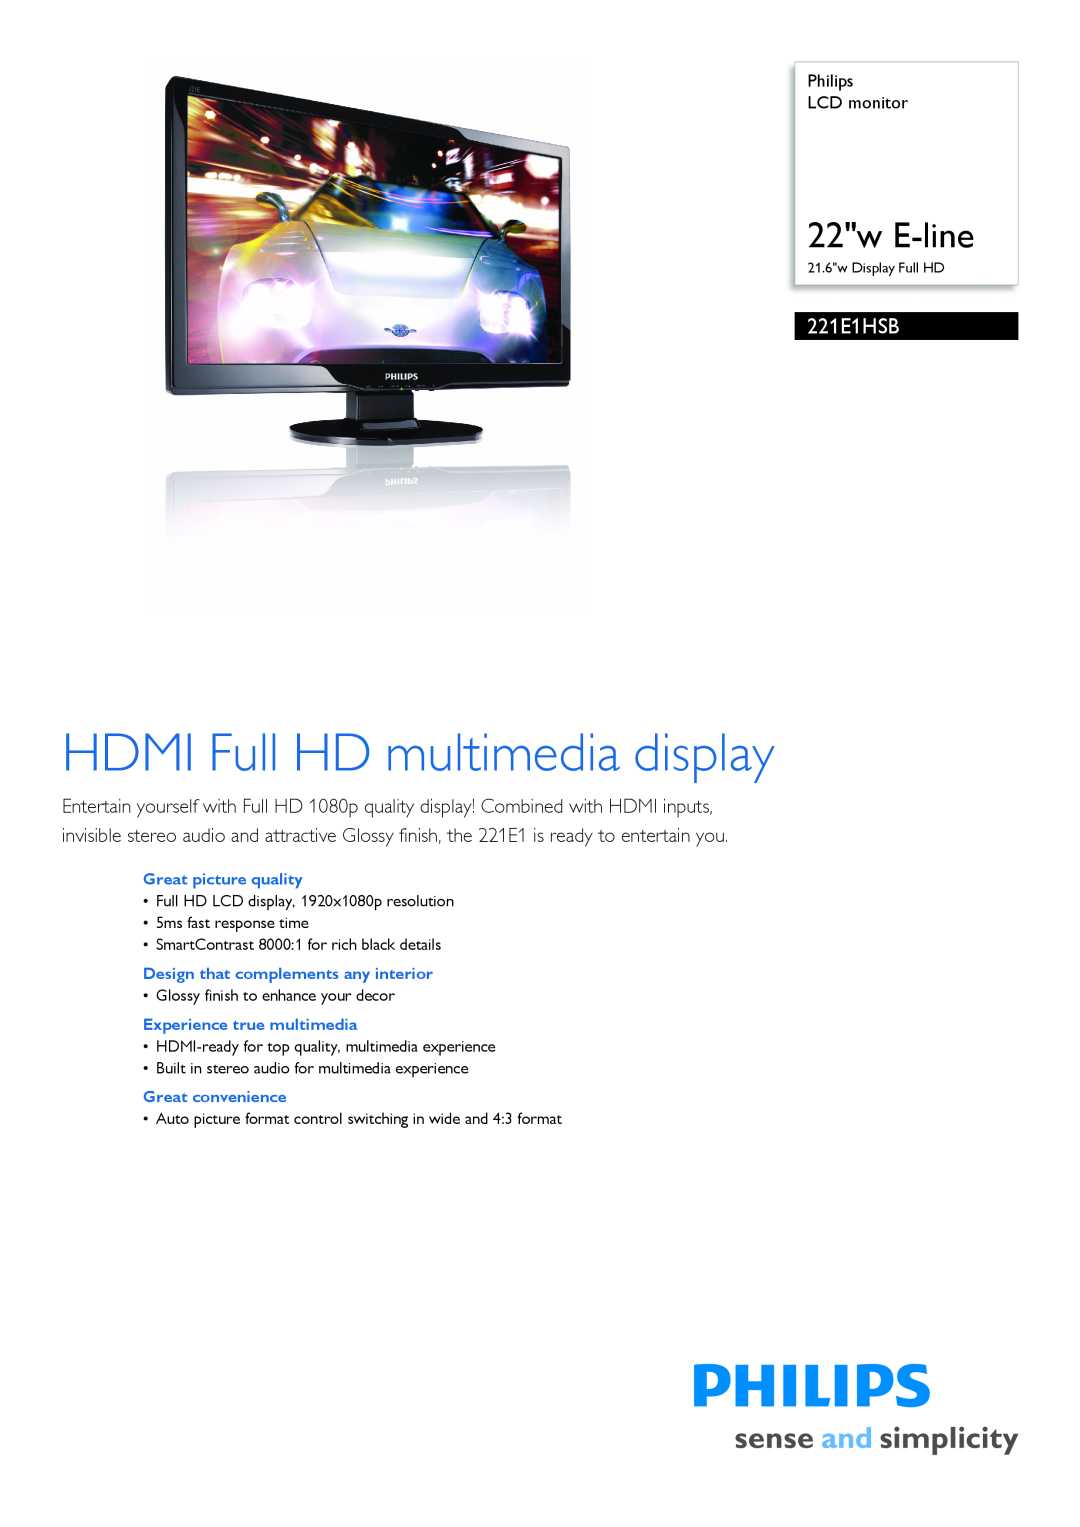 Philips 221E1HSB/93 manual Philips LCD monitor, Great picture quality, Design that complements any interior, 22w E-line 